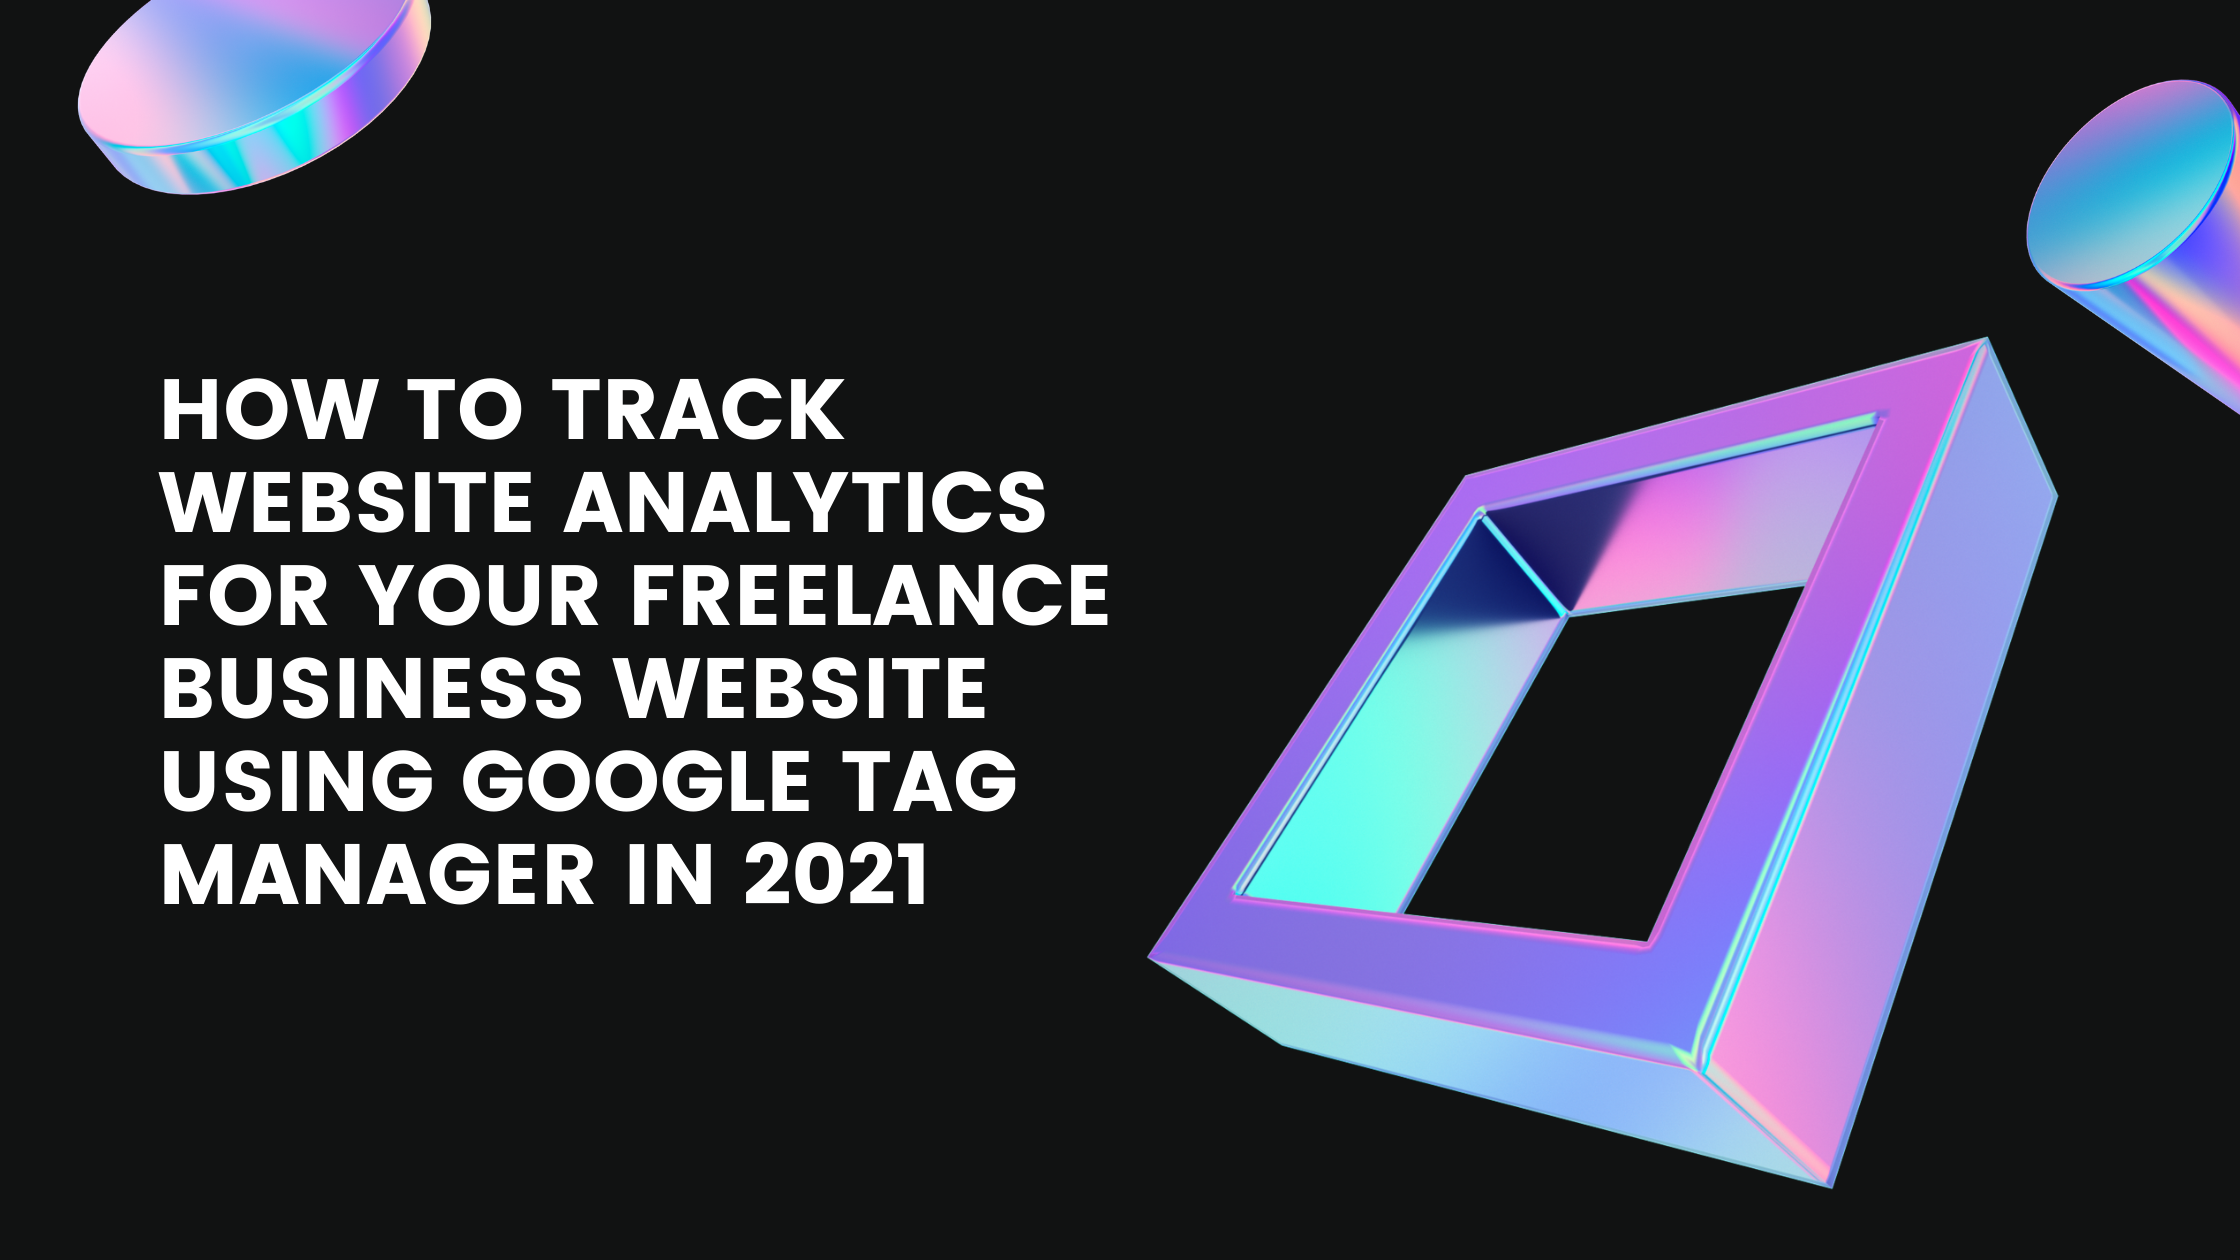 How to track website analytics for your freelance business website using Google Tag Manager in 2021 